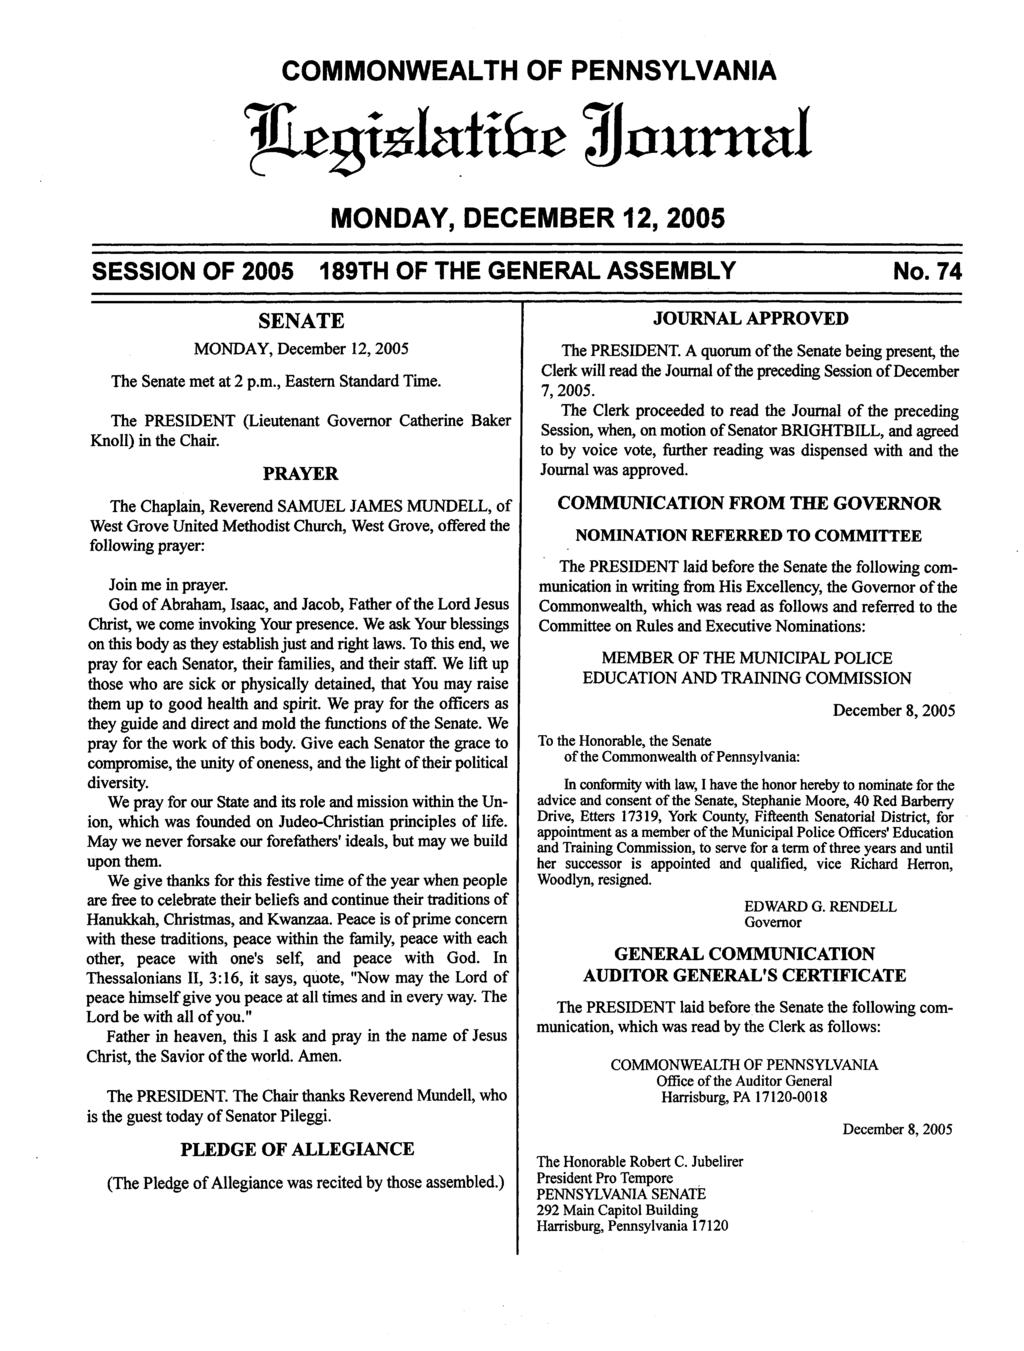 COMMONWEALTH OF PENNSYLVANIA ^ie^mbdxbt journal MONDAY, DECEMBER 12, 2005 SESSION OF 2005 189TH OF THE GENERAL ASSEMBLY No. 74 SENATE MONDAY, December 12,2005 The Senate met at 2 p.m., Eastern Standard Time.